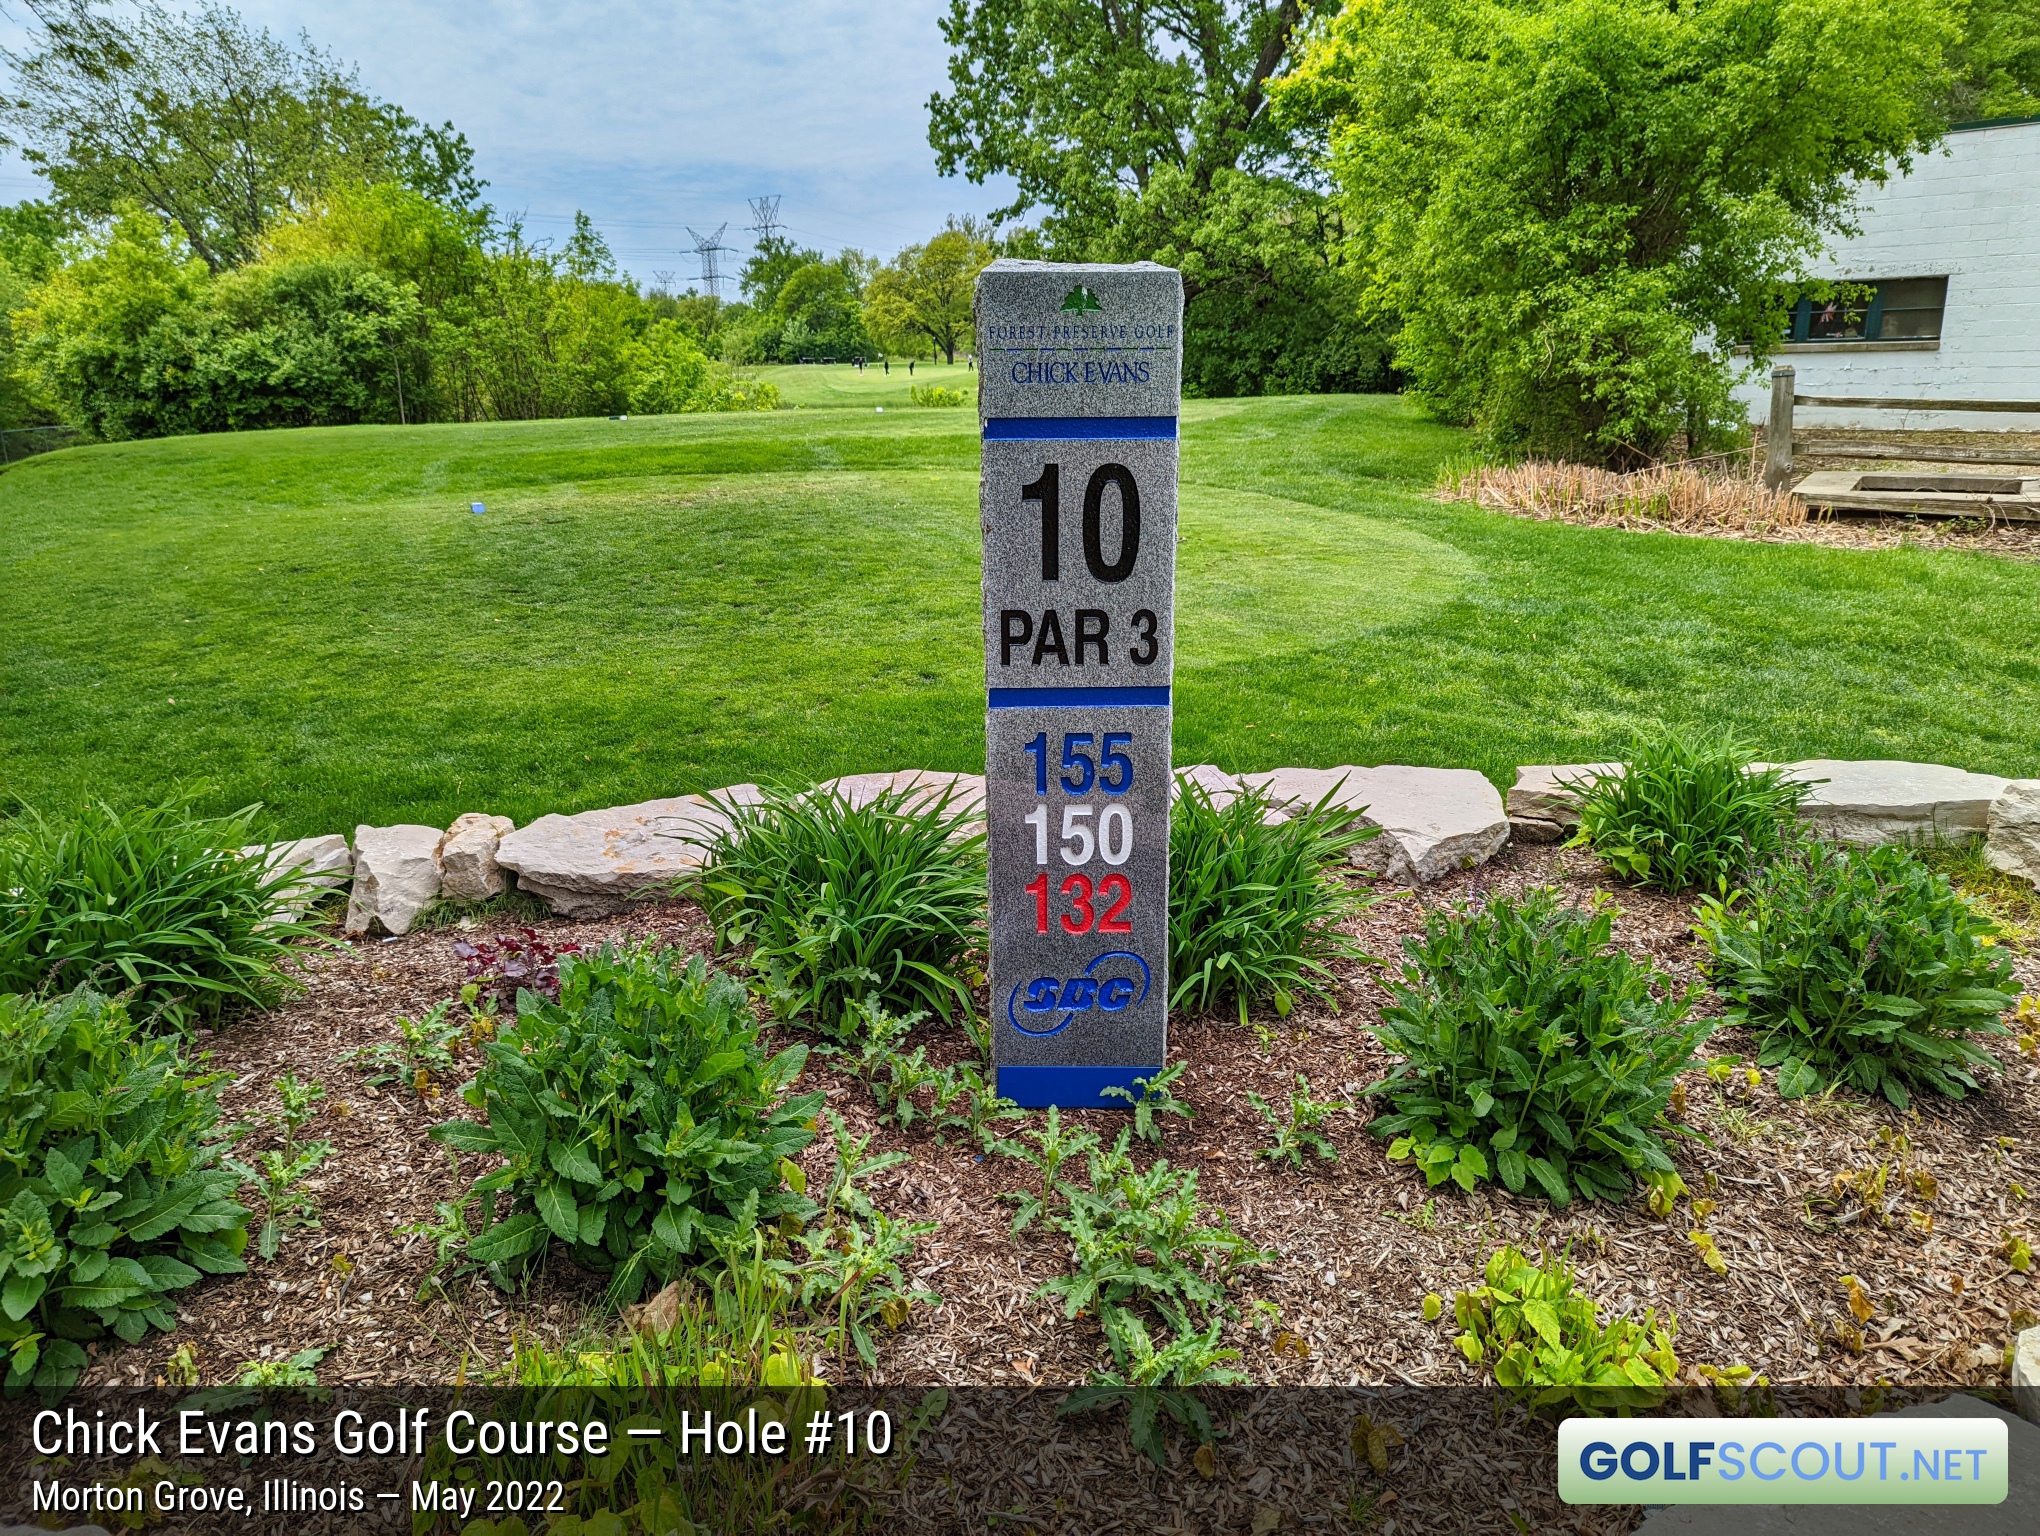 Photo of hole #10 at Chick Evans Golf Course in Morton Grove, Illinois. 